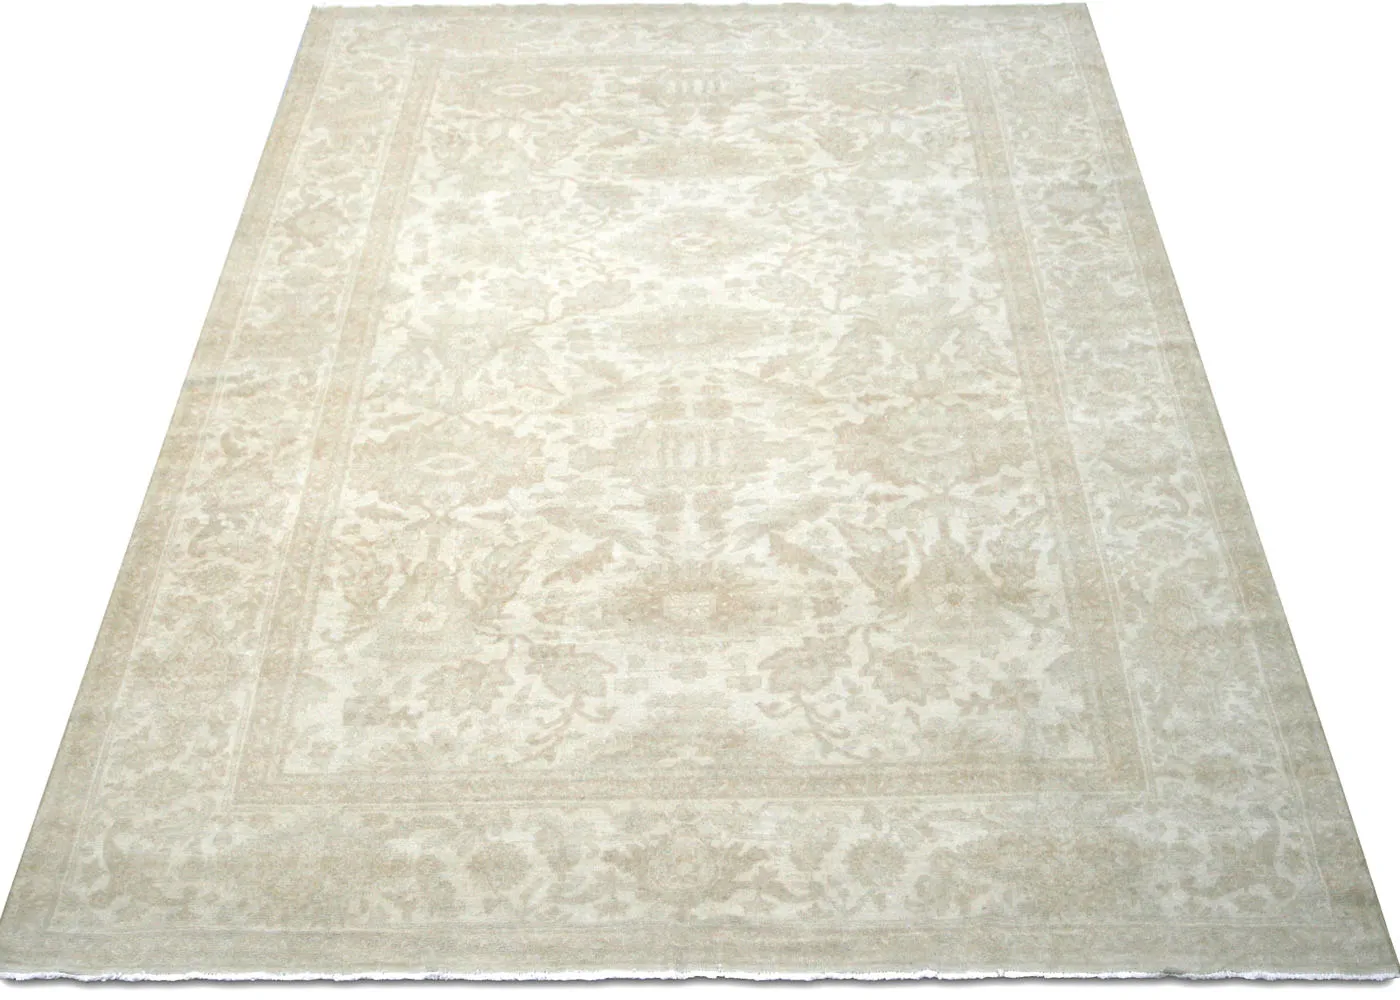 2000 Egyptian Sultanabad Rug-10'1"x13'3" - White - White